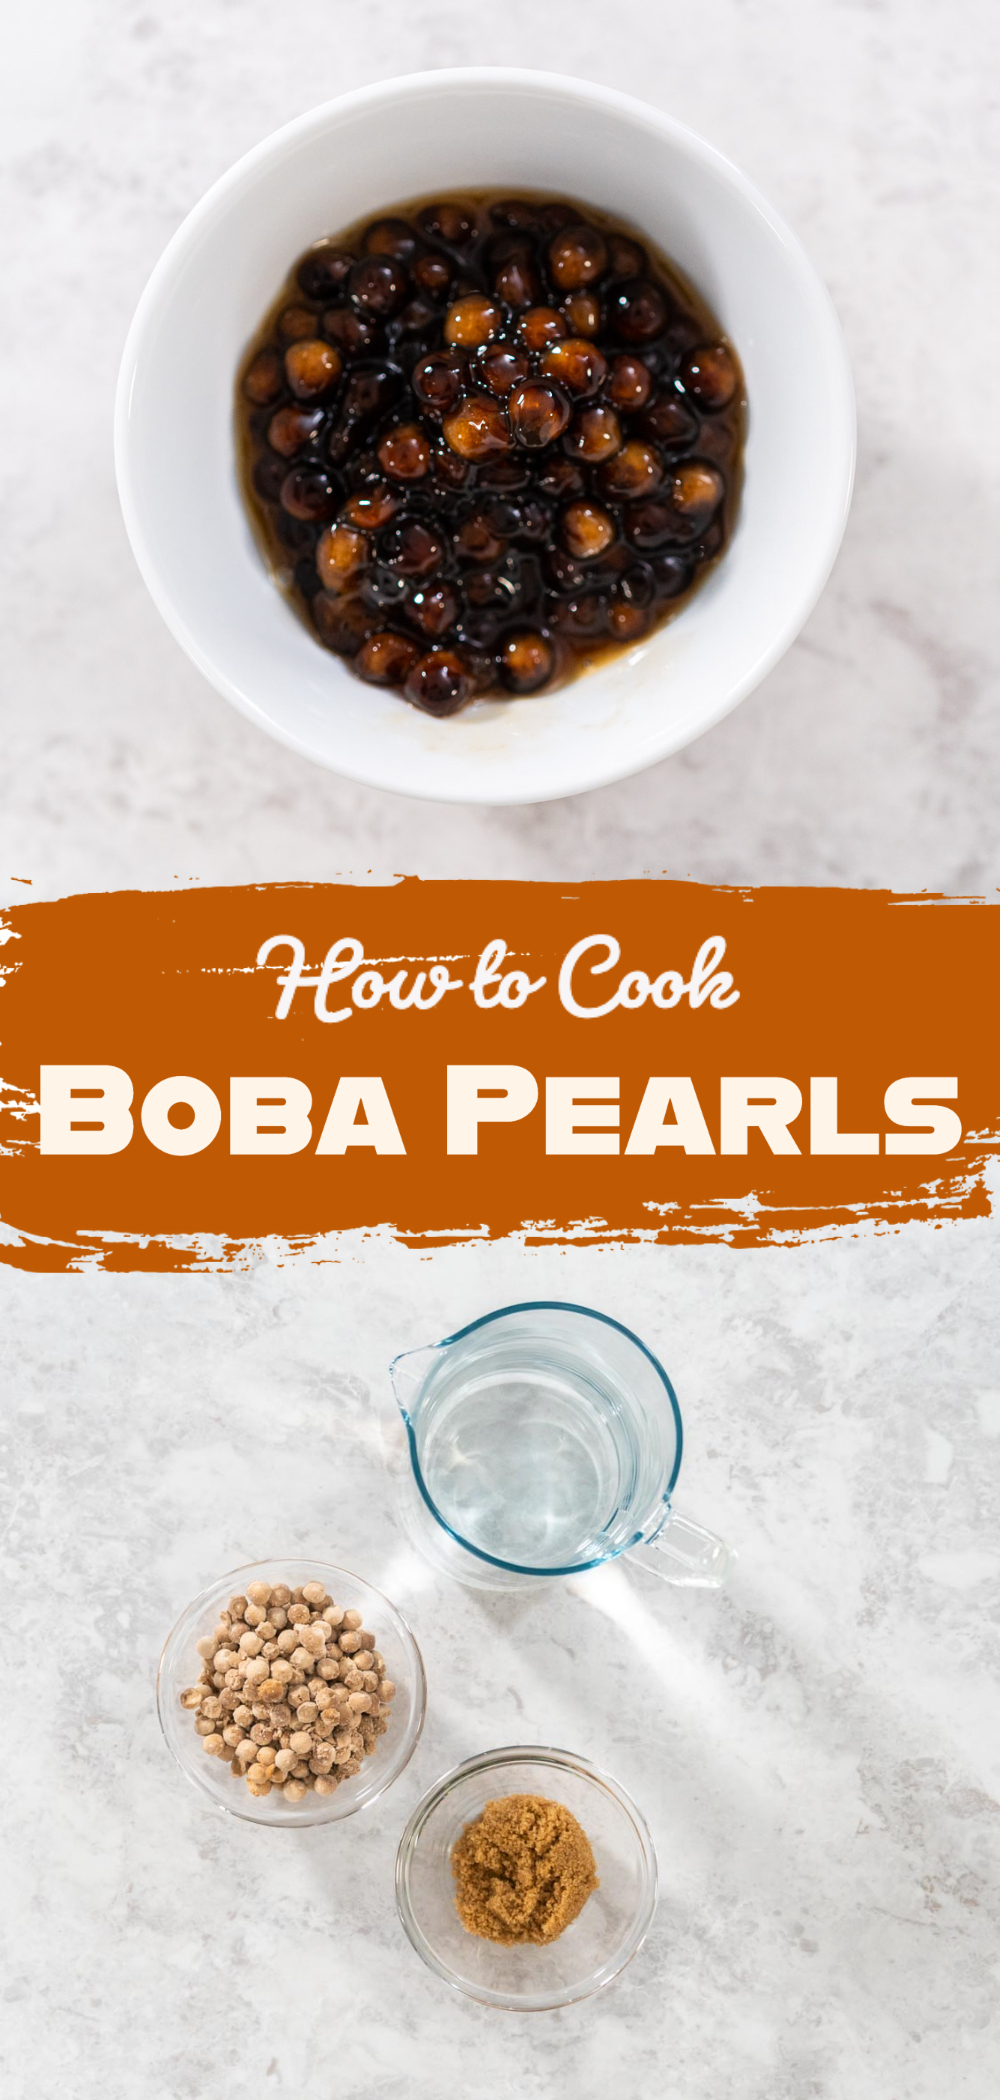 How to Cook Boba Pearls